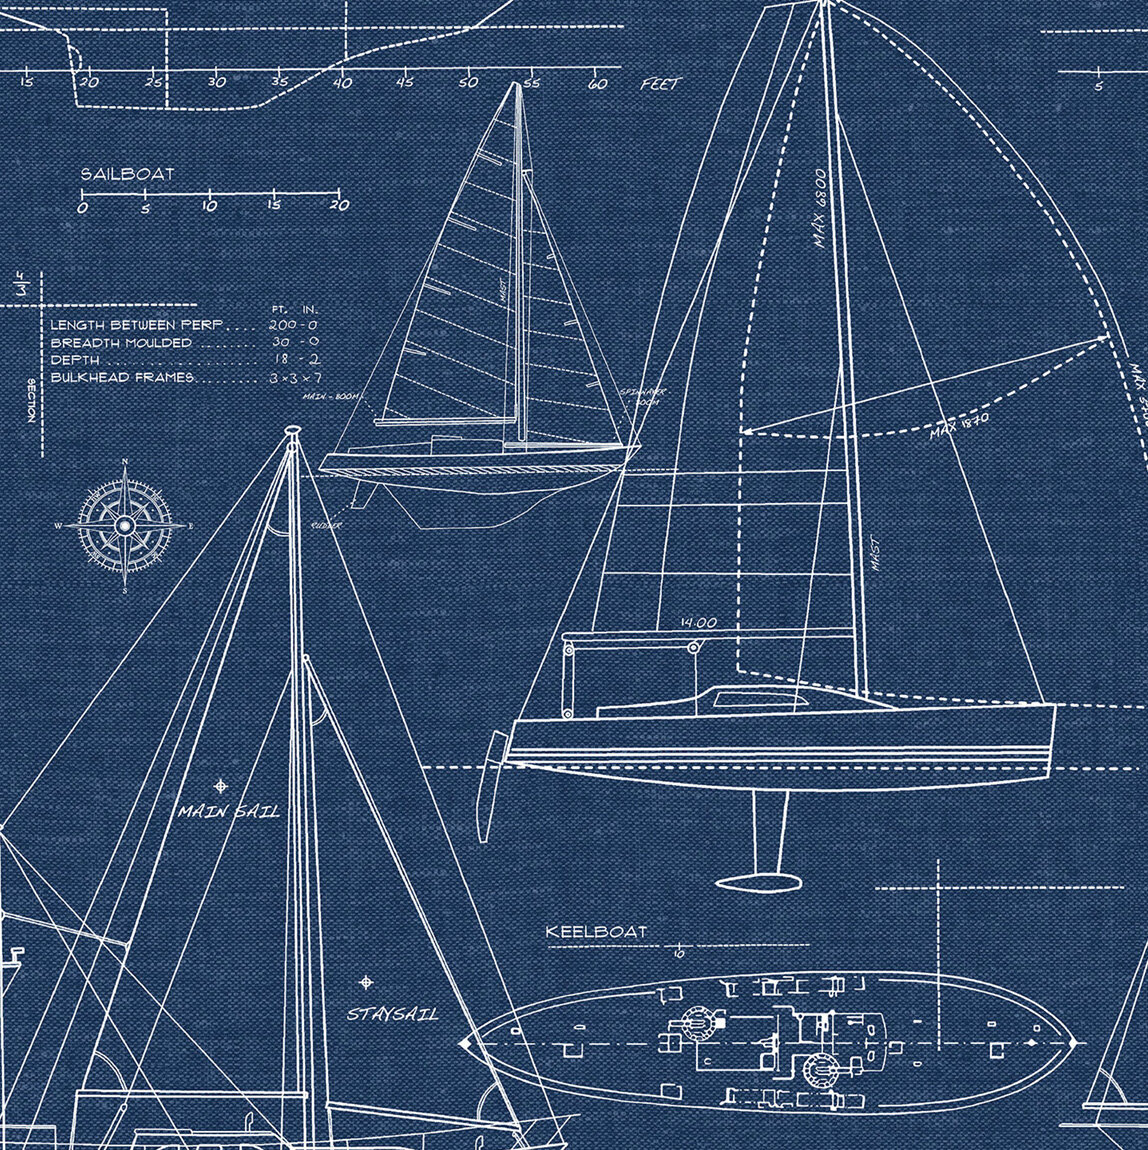 New Design High Quality sailing boat design printed on a solid background GREY